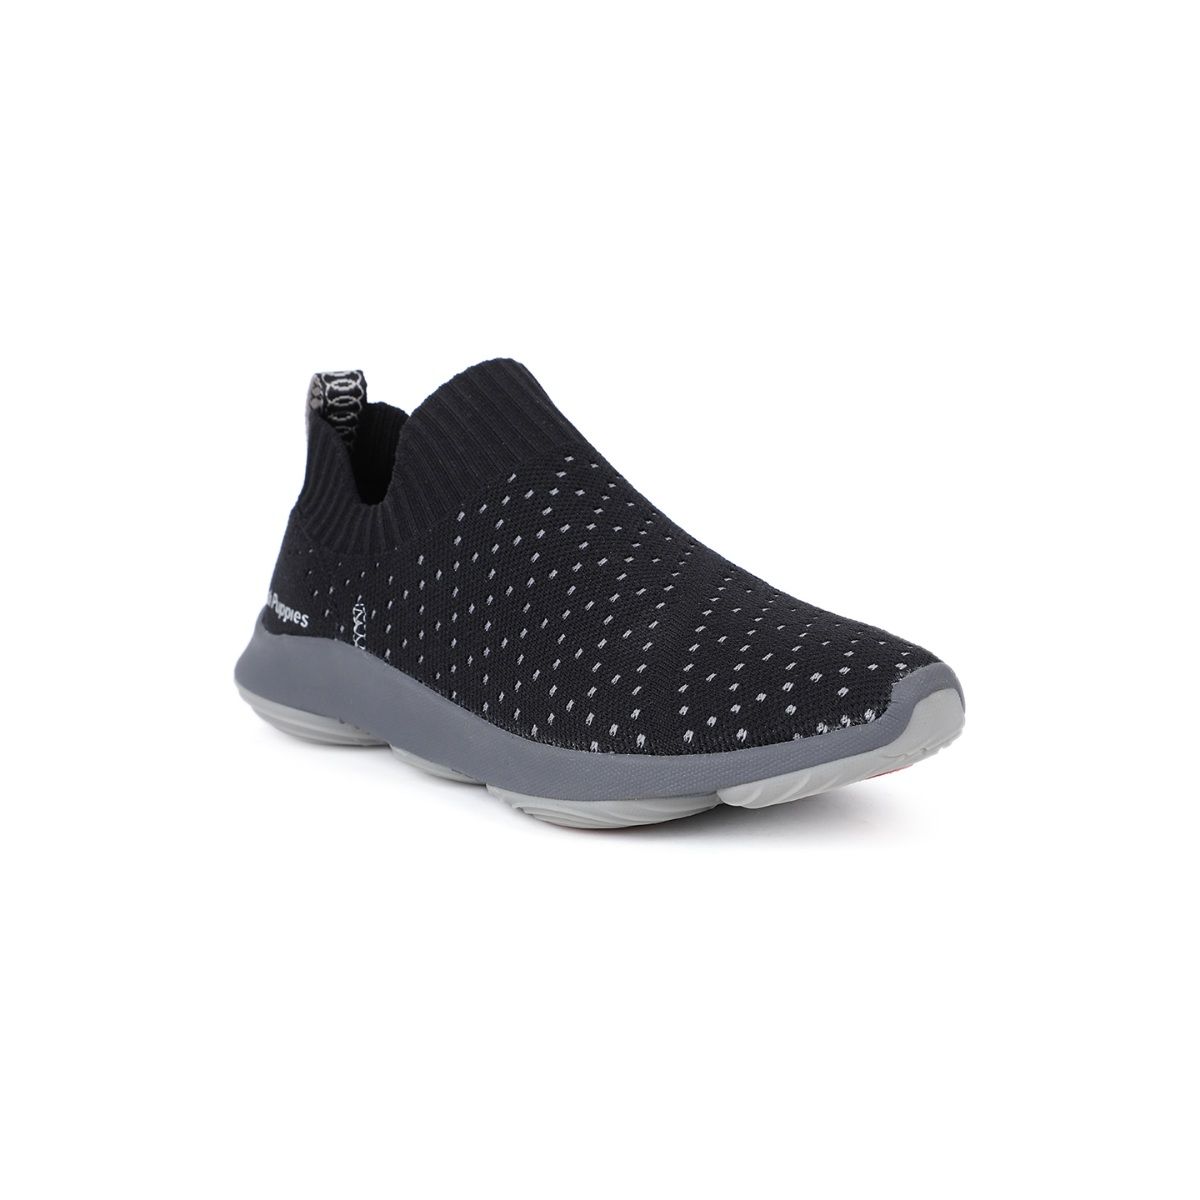 Buy Hush Puppies Textured Black Casual Shoes Online